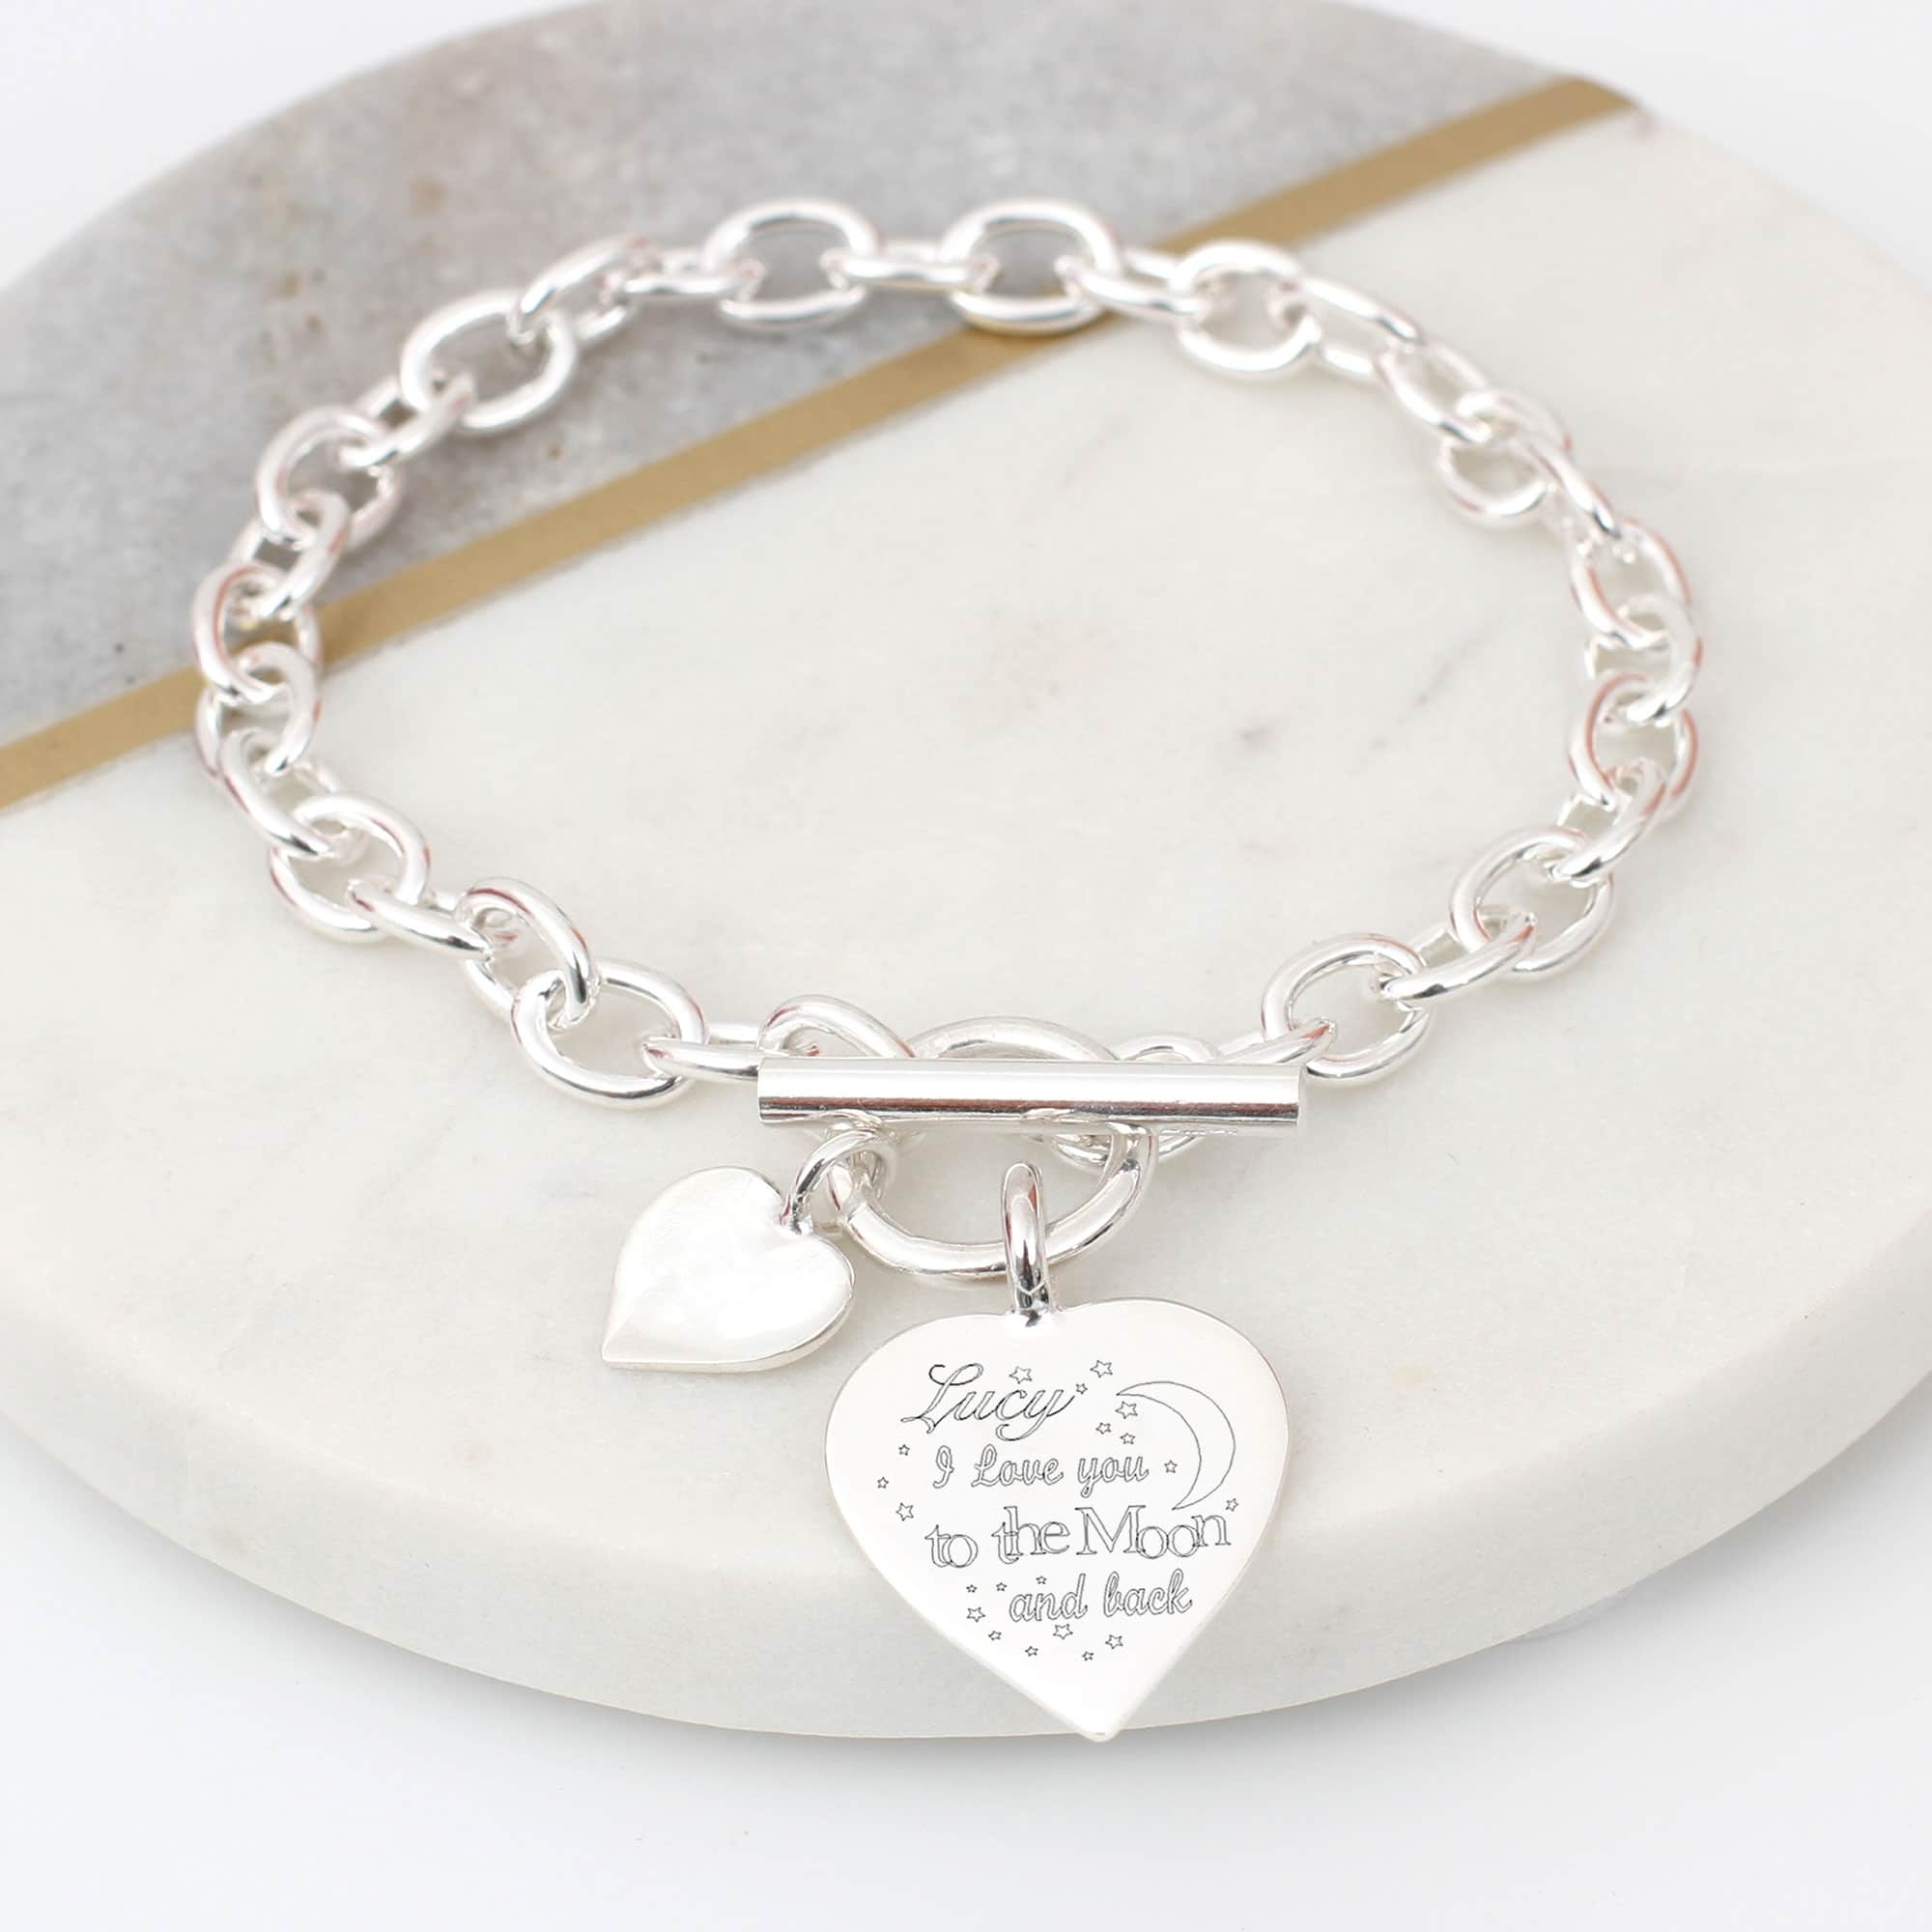 Love You To The Moon And Back’ Silver T Bar Bracelet – Hurley Burley